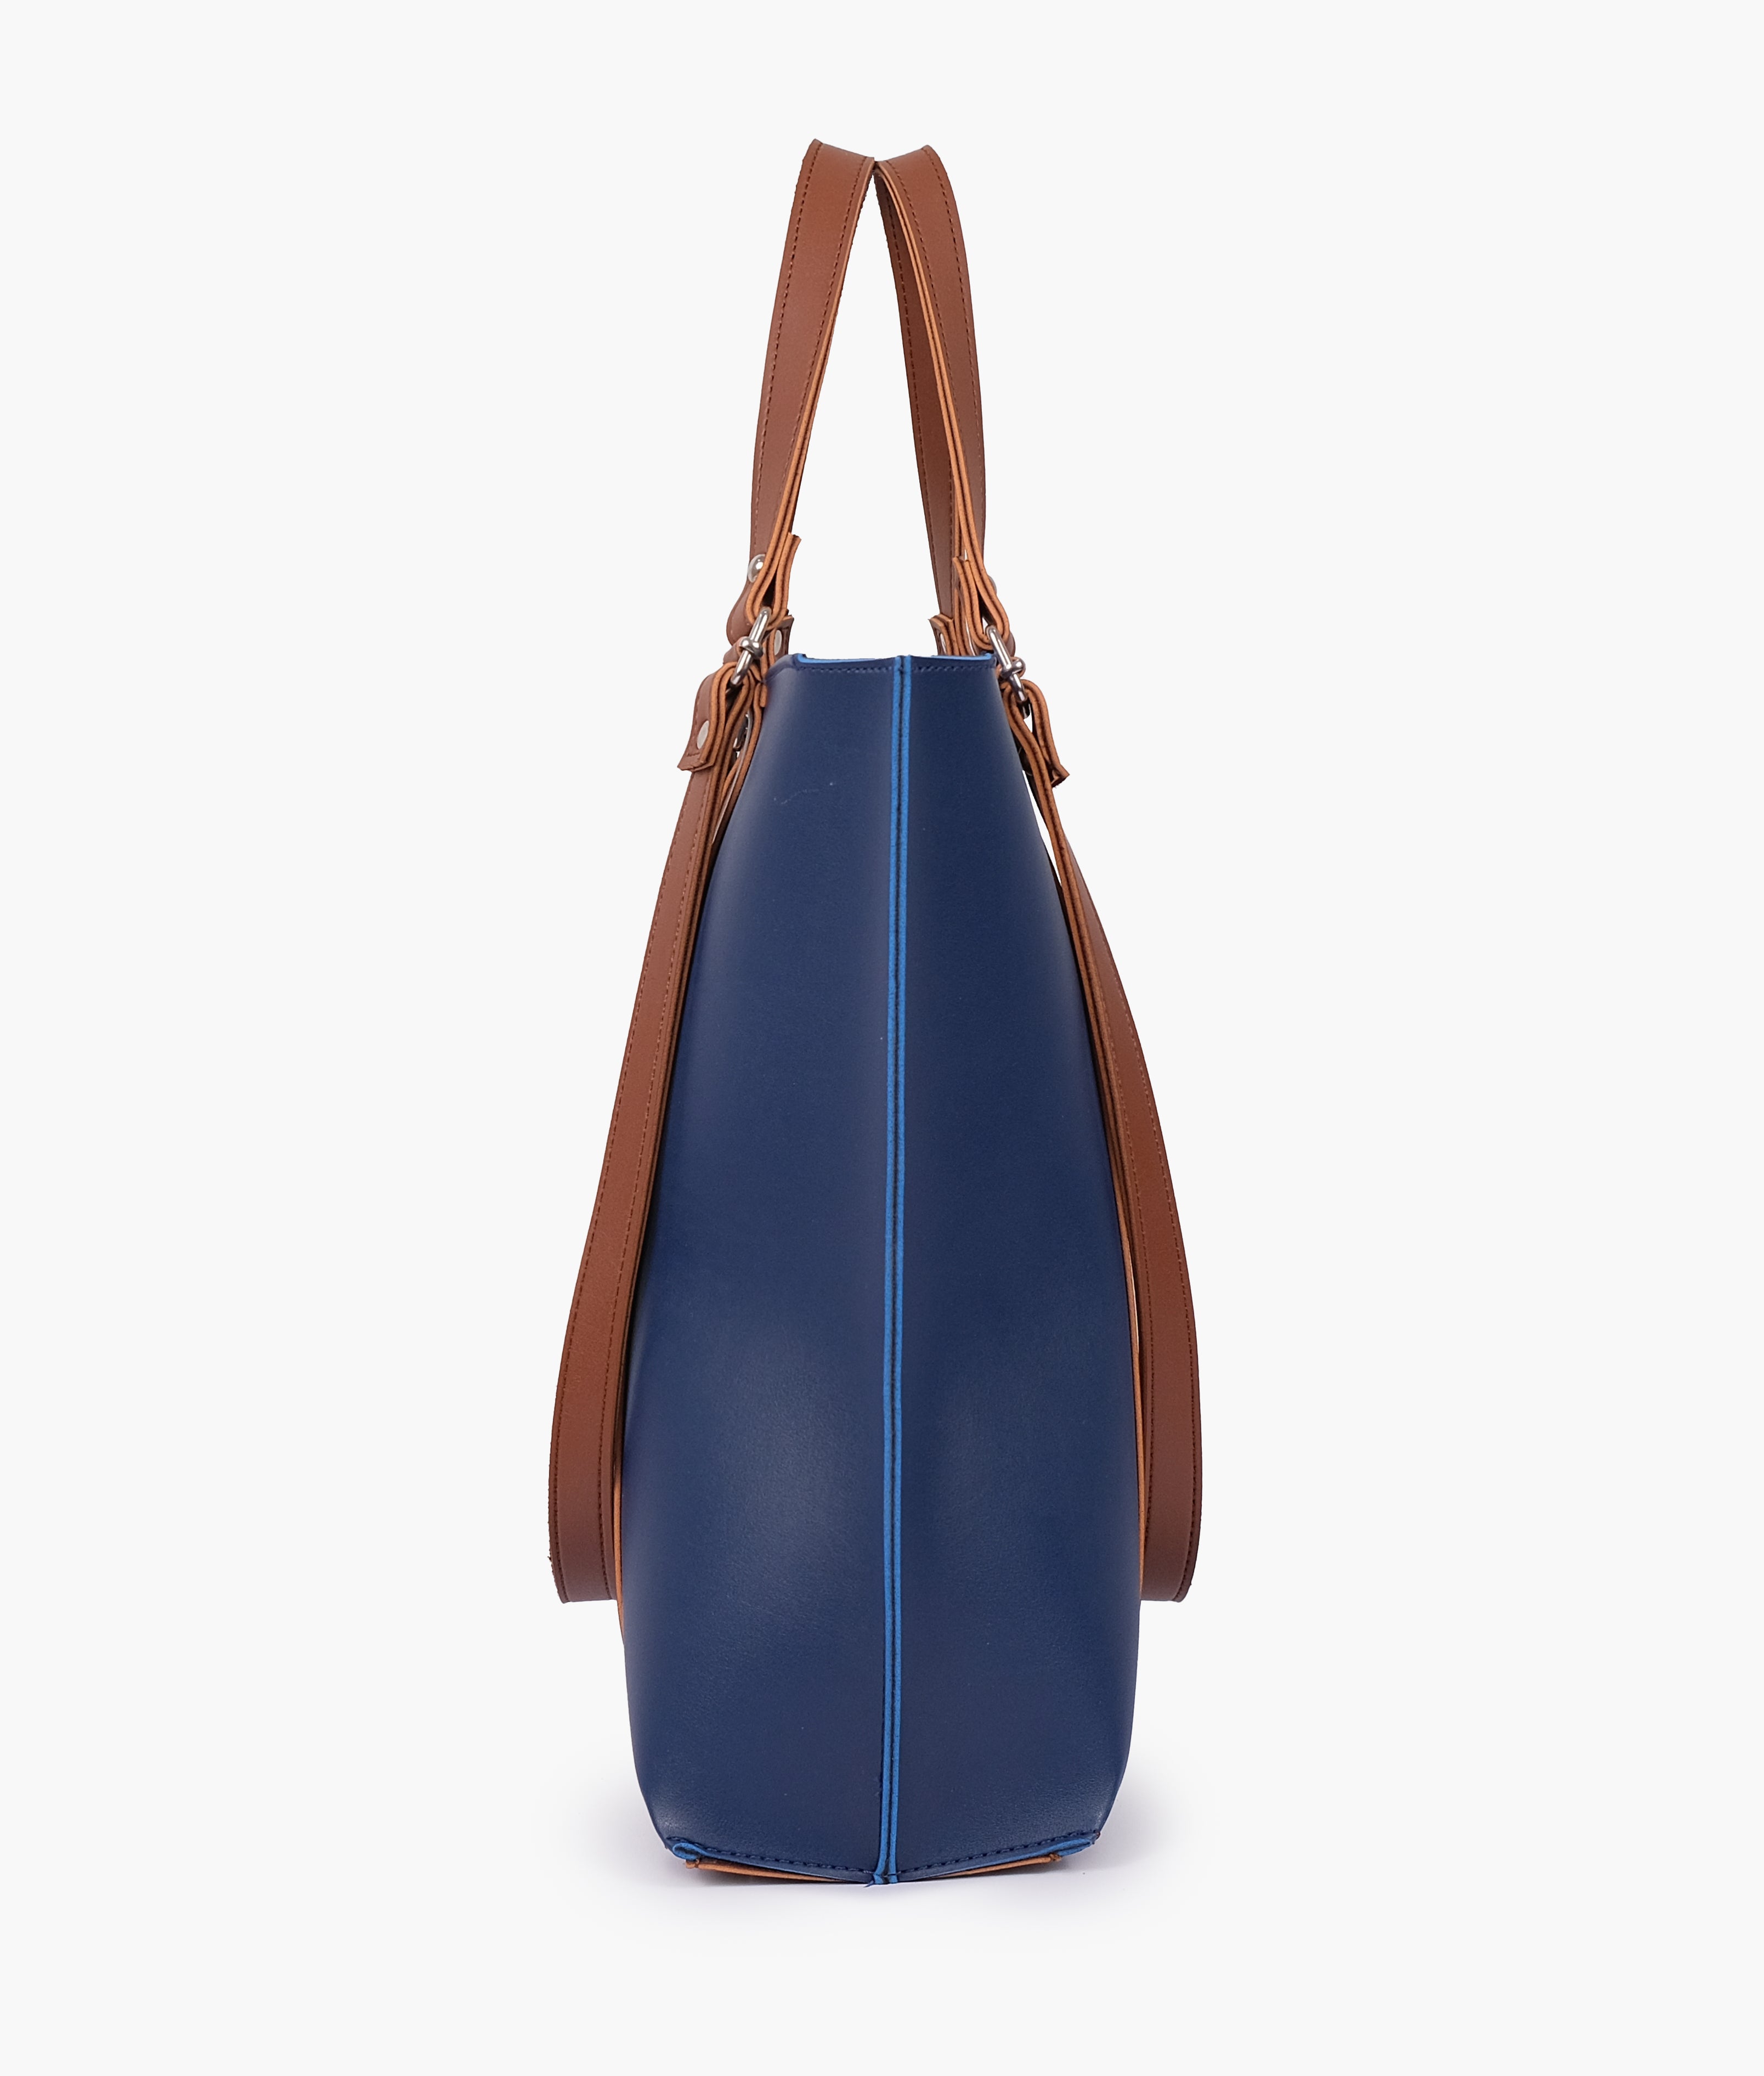 Blue and brown double-handle tote bag